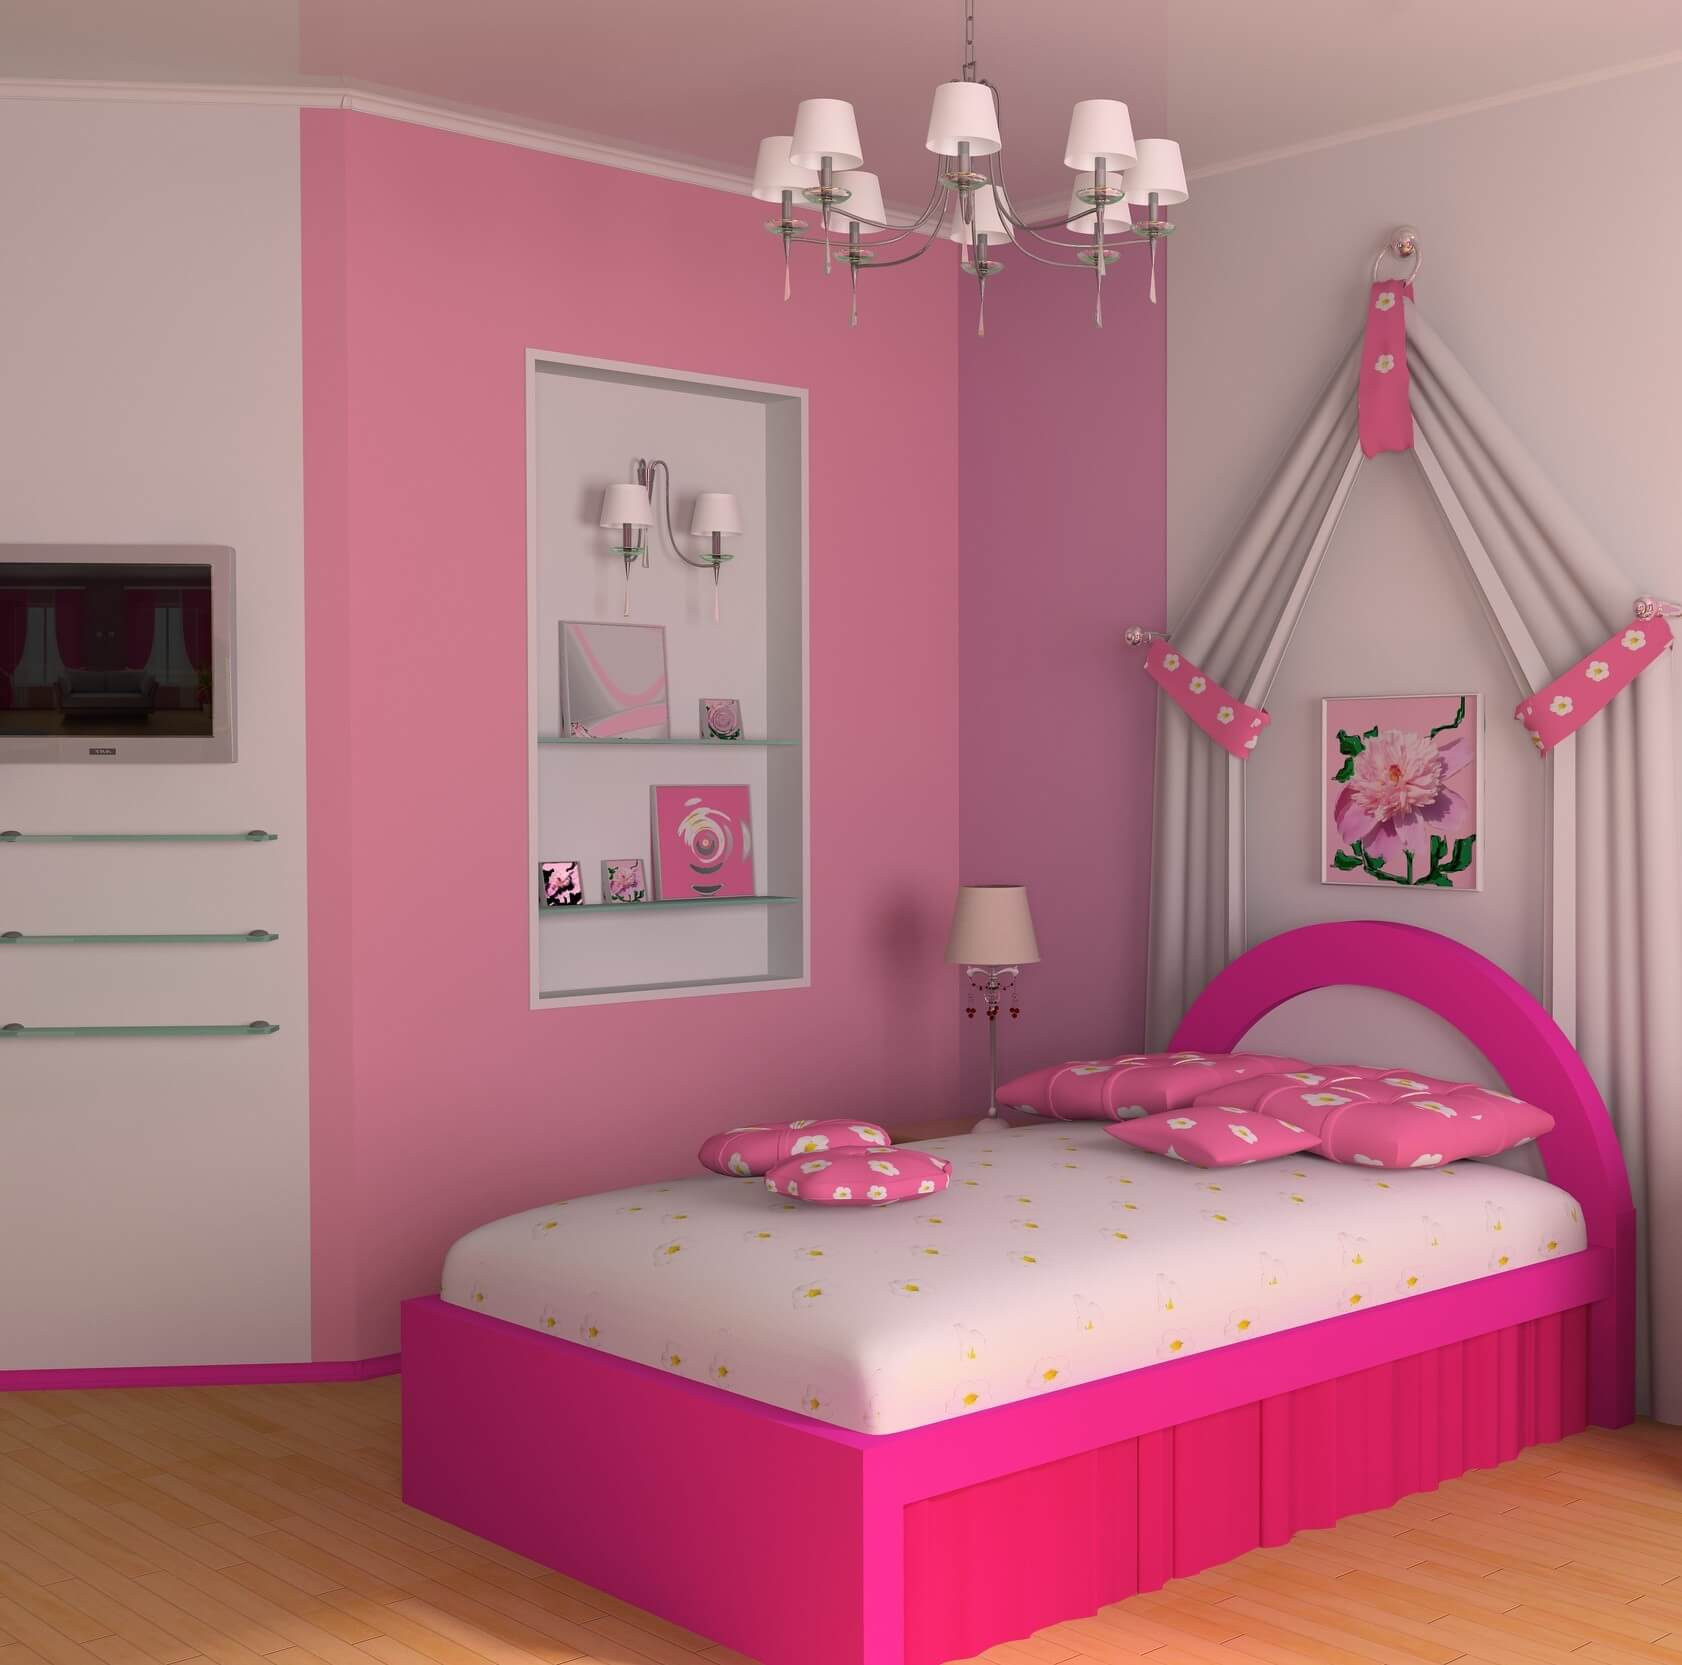 Girls Bedroom Funiture
 Ideas for Decorating a Girl Bedroom Furniture TheyDesign